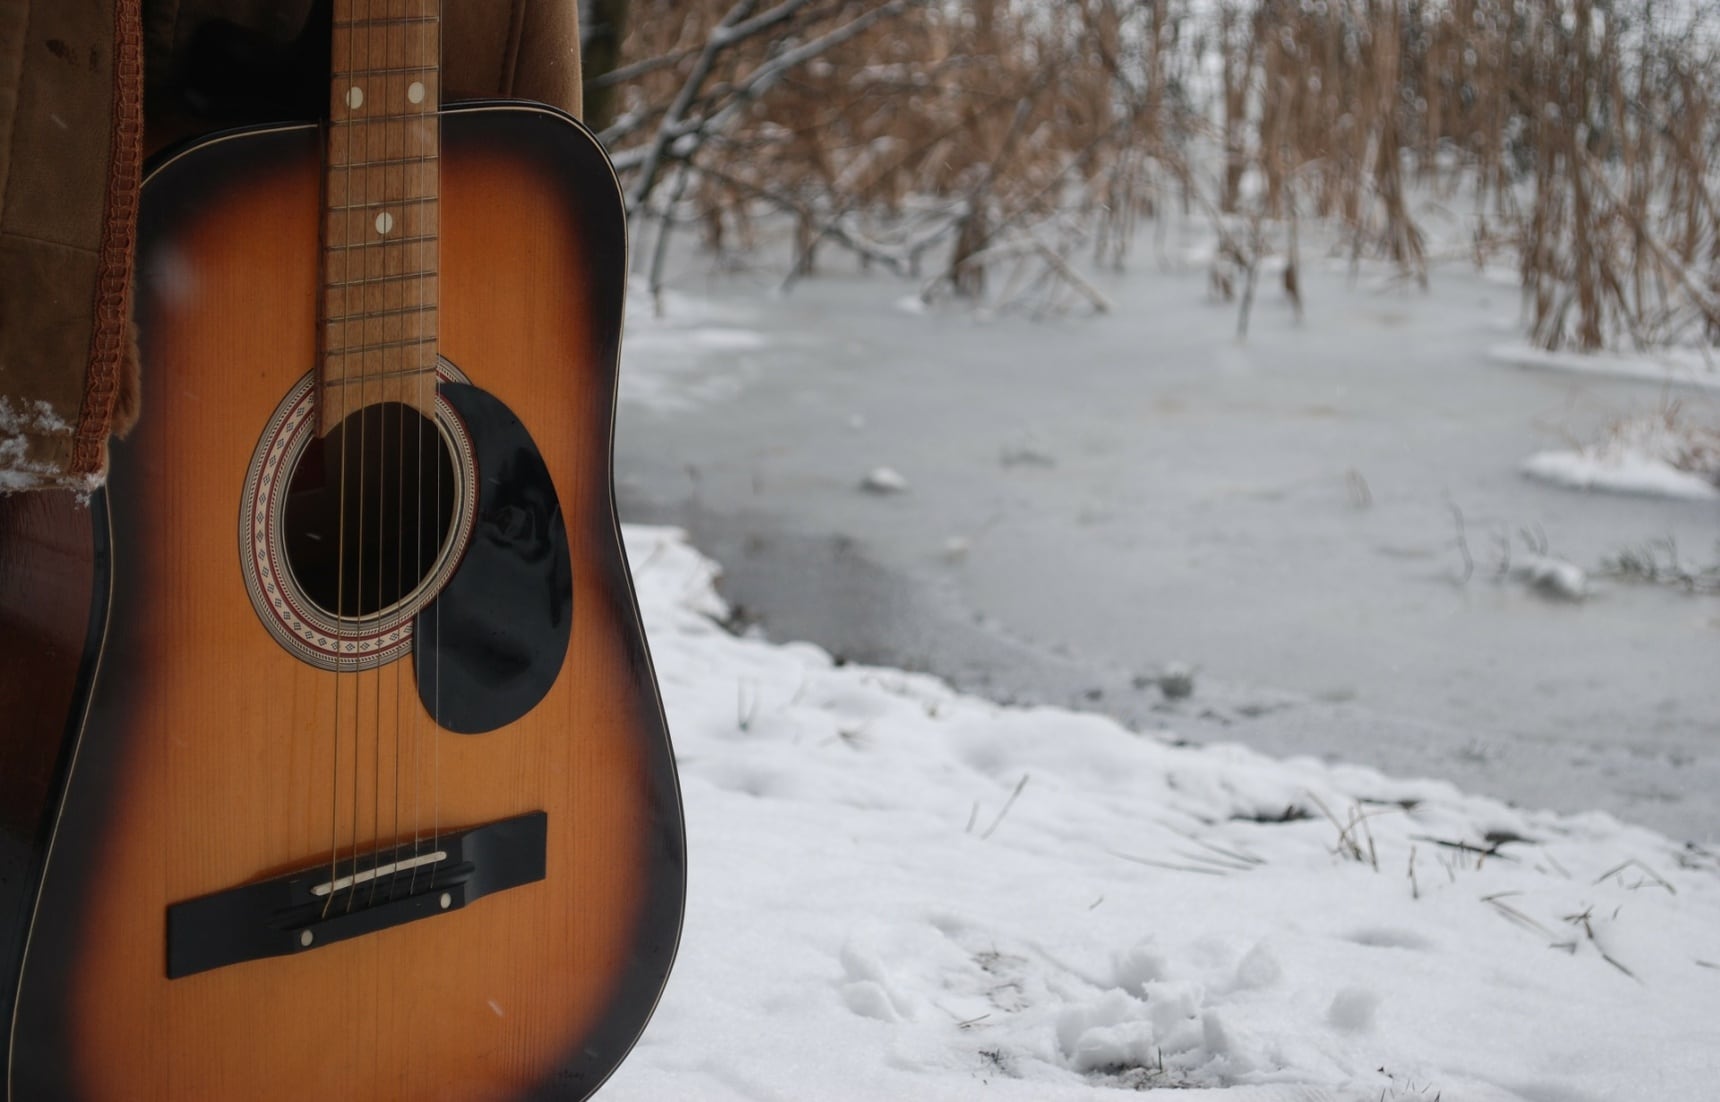 Stay Warm in Winter with Snowy Japanese Songs